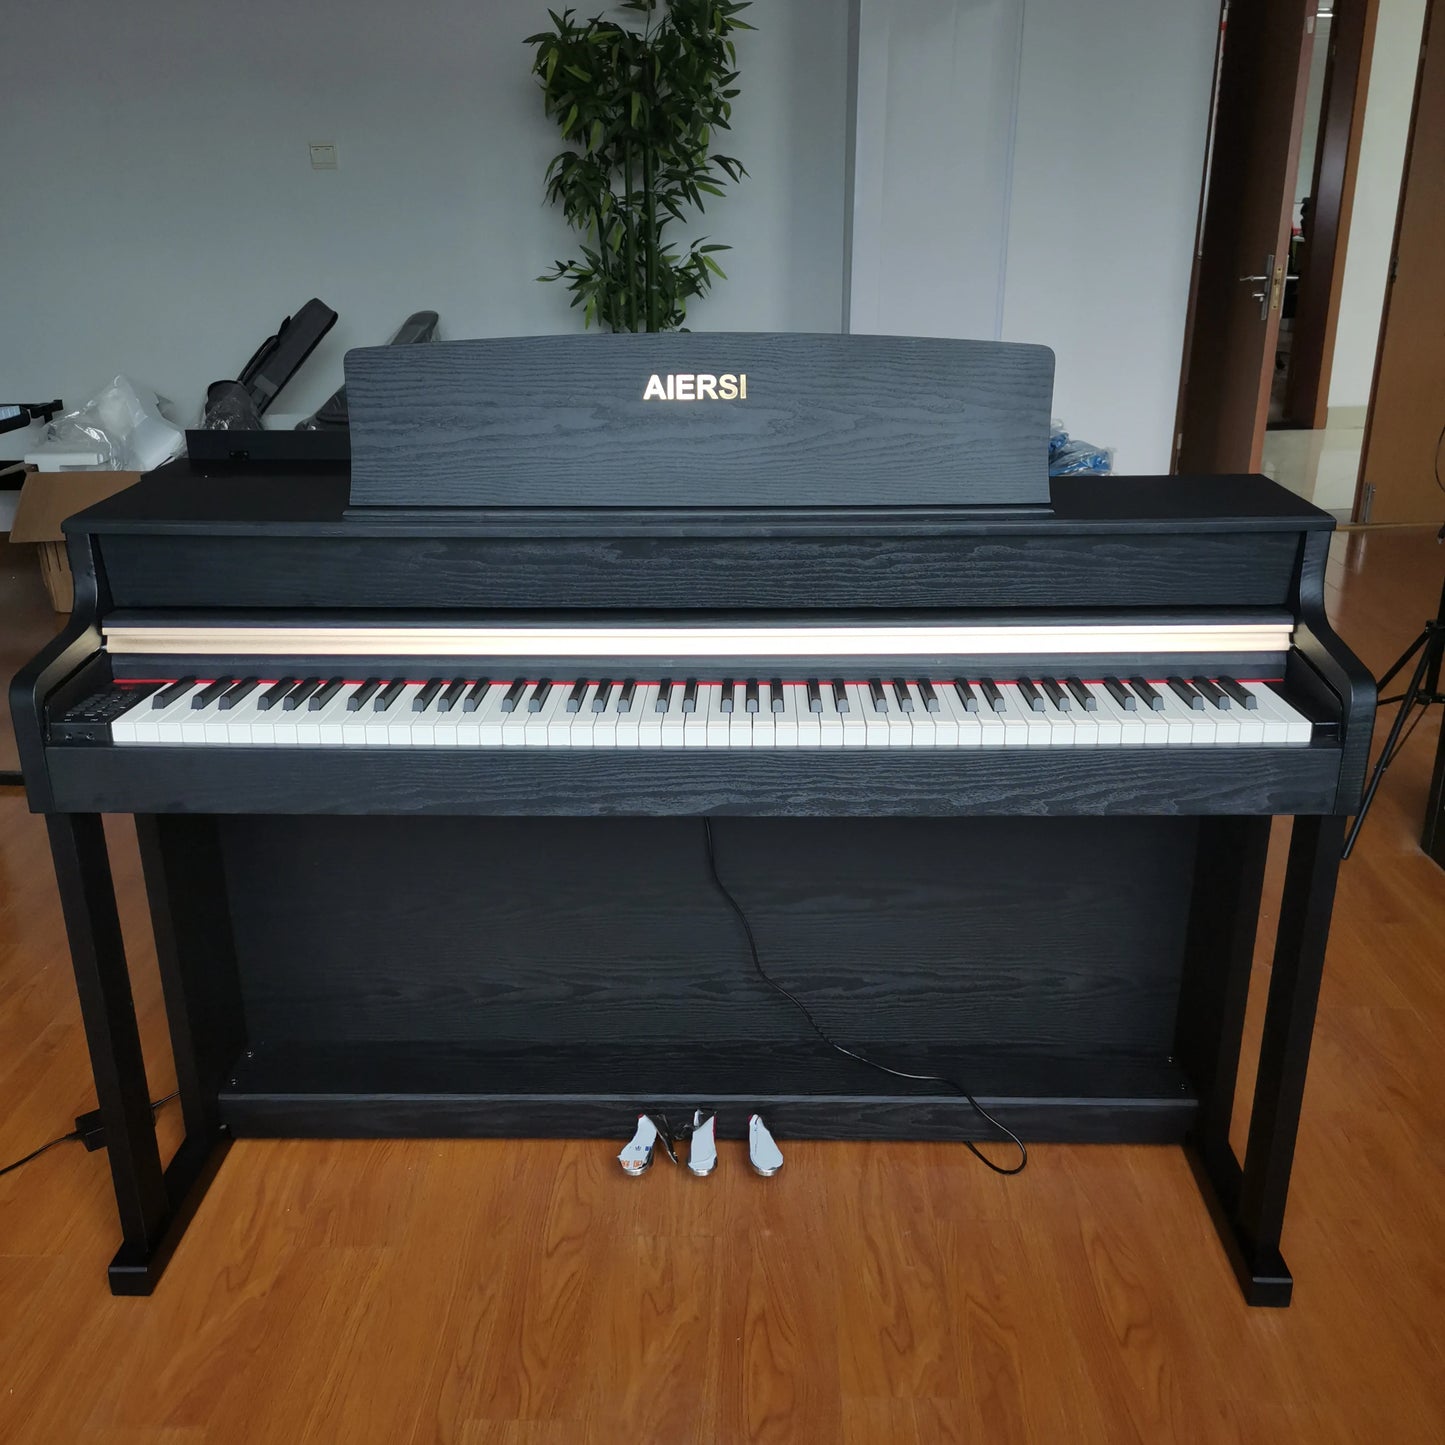 Aiersi brand 88 keys Hammer electronic upright Piano Keyboard musical instrument